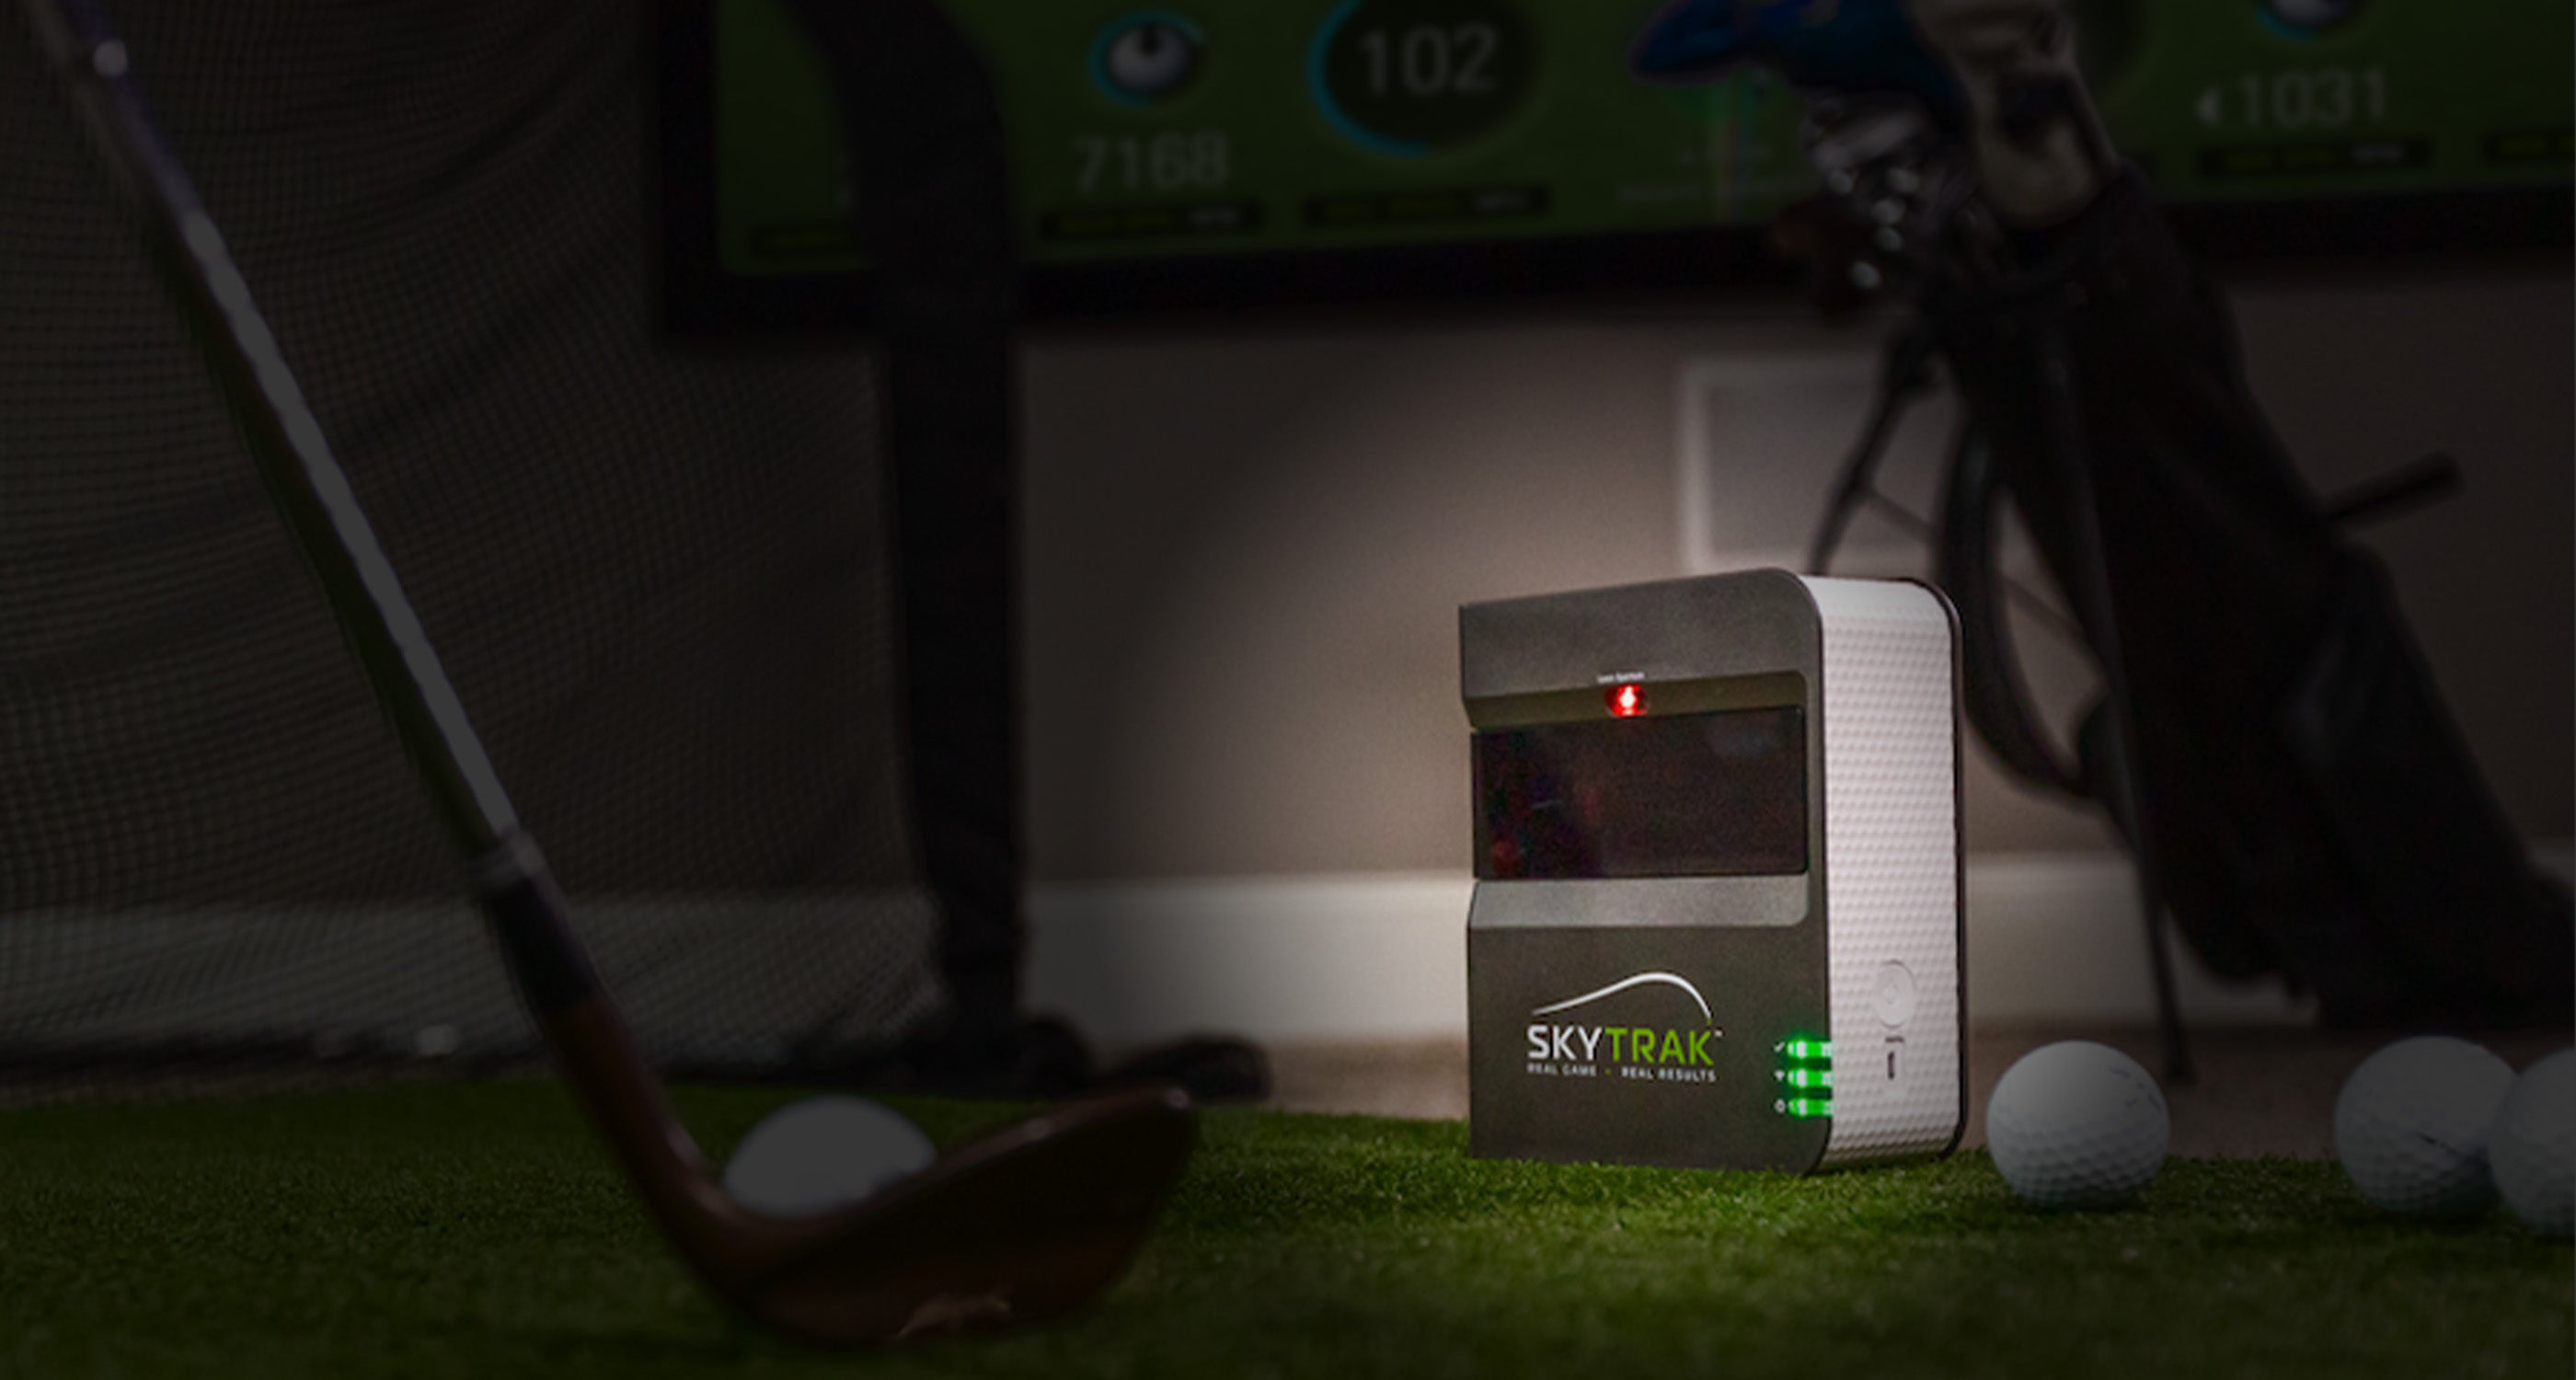 SKYTRAK launch monitor for at home golf